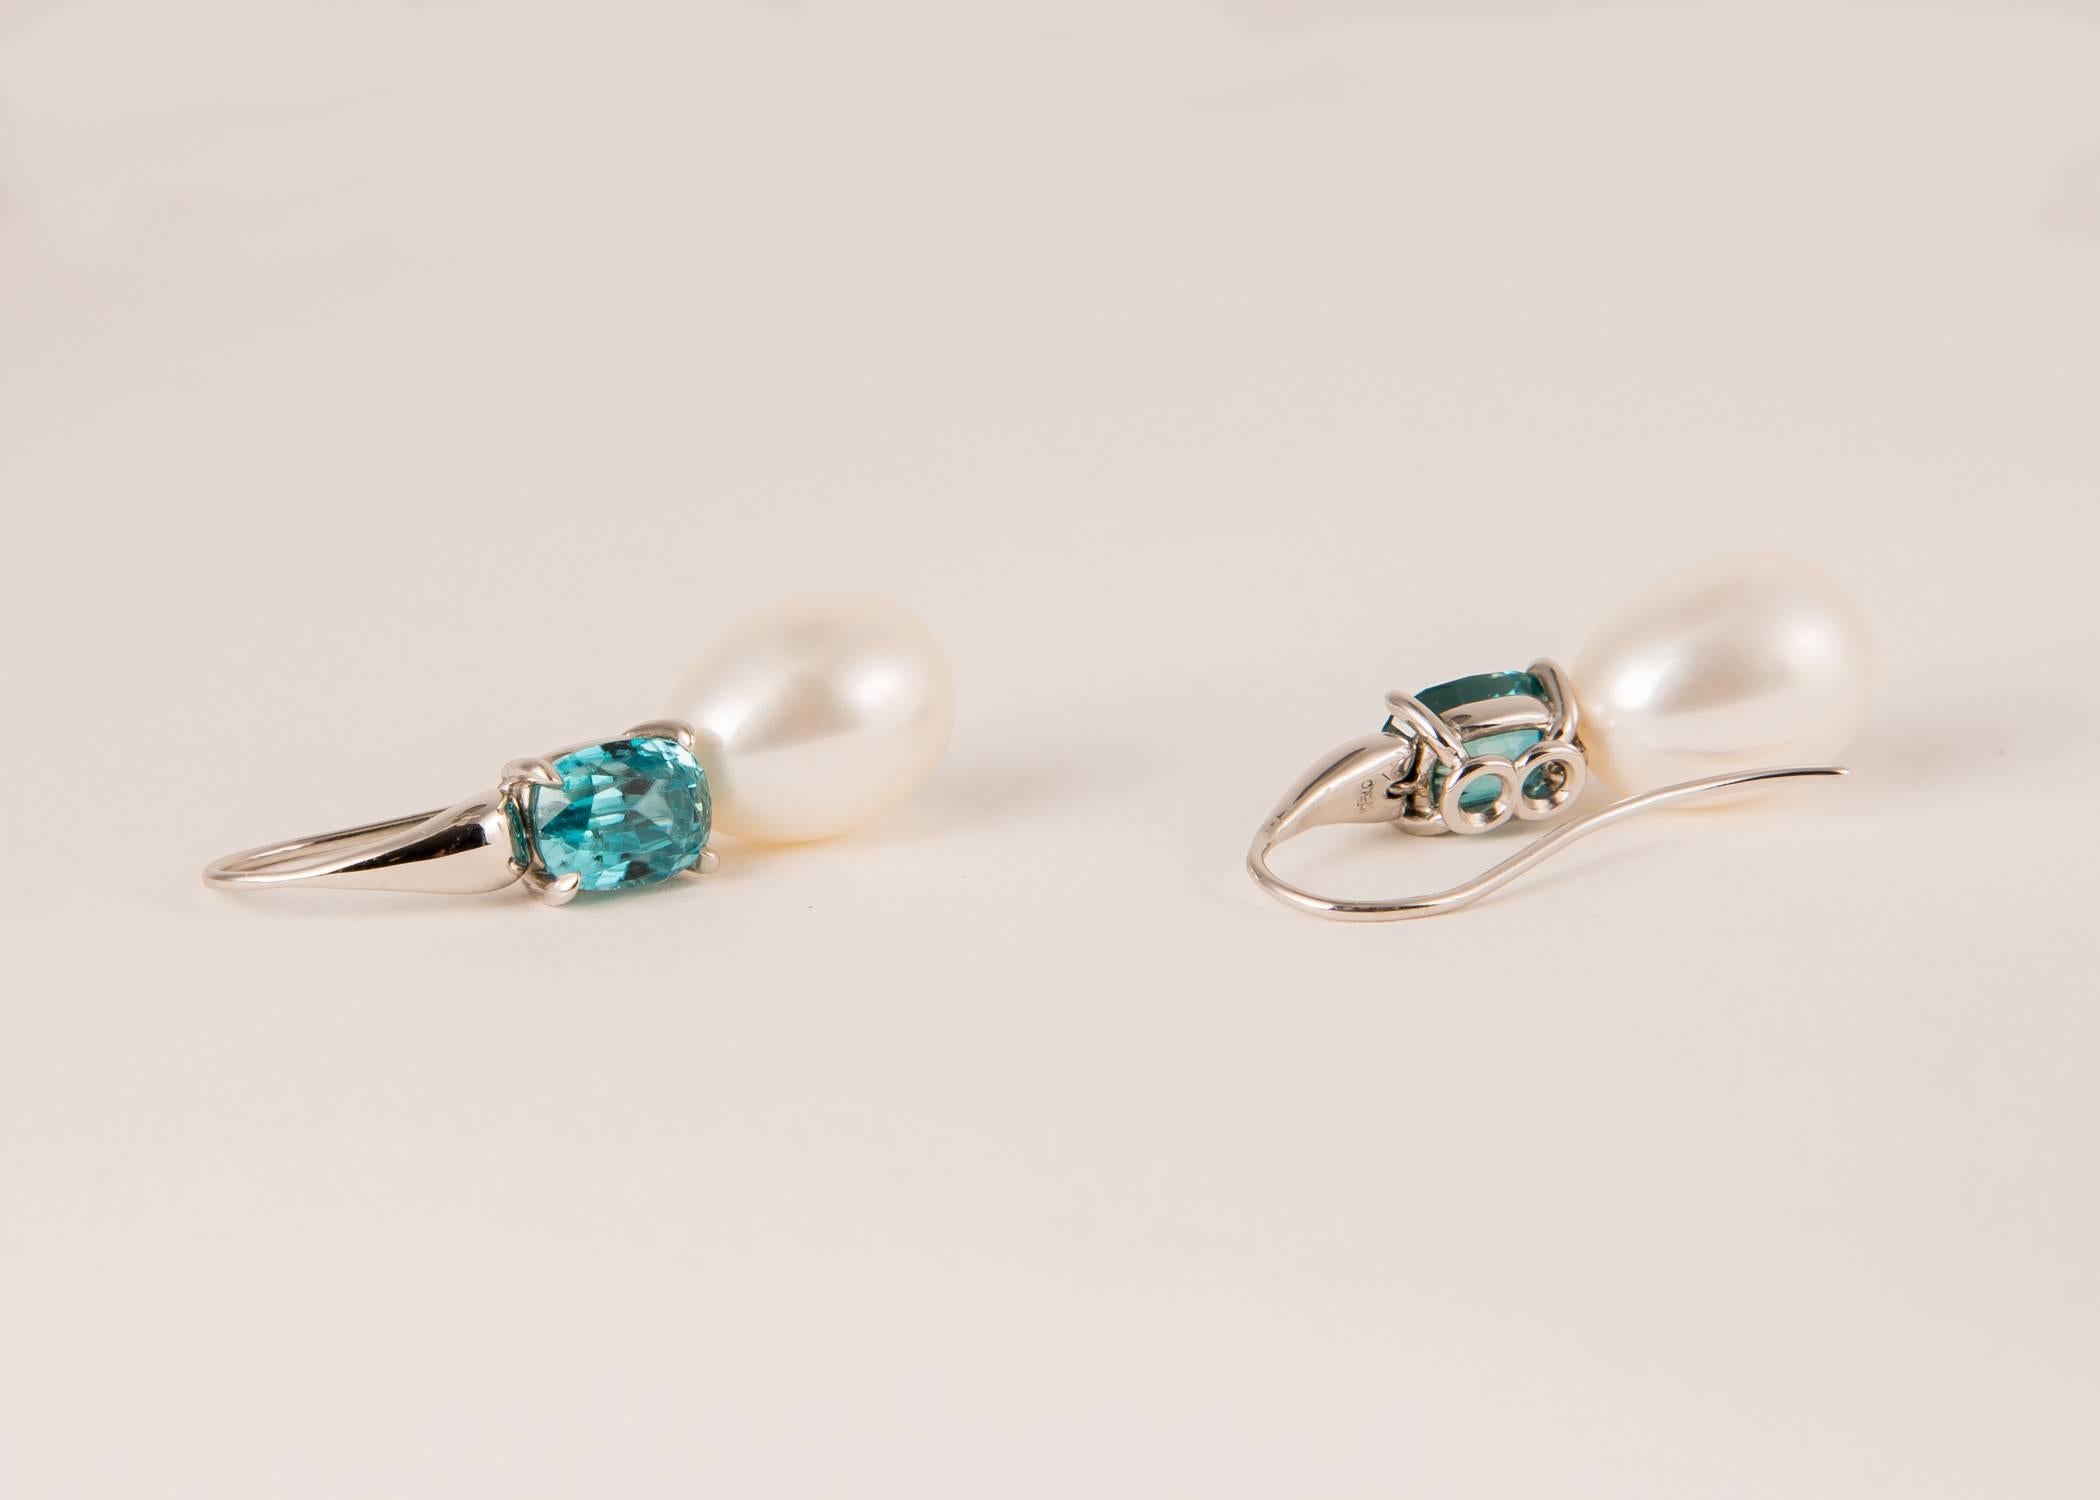 Handmade 18k white gold earrings featuring a matched pair of fiery blue zircons and a pair of cultured freshwater pearls. Simply elegant !!! 1 1/4 inches in length